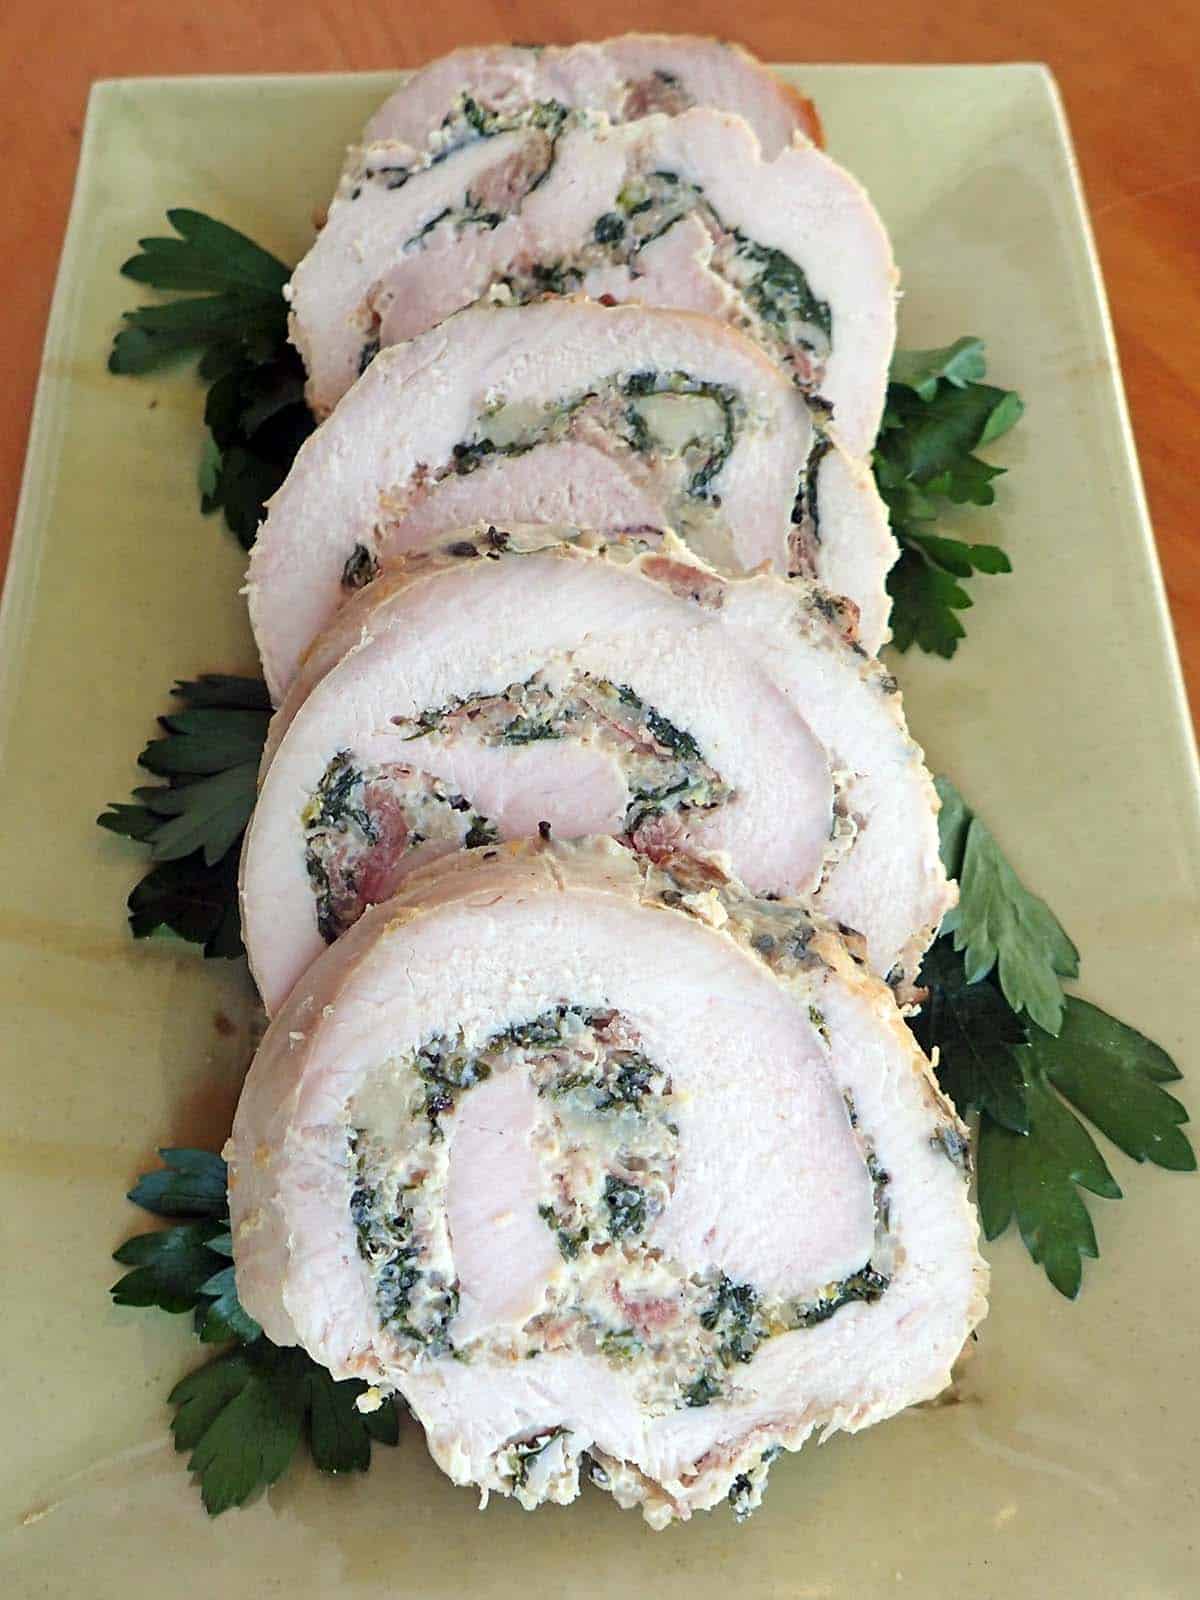 Turkey Roulade with Quinoa, Swiss Chard and Prosciutto cut into slices on a serving plate with parsley